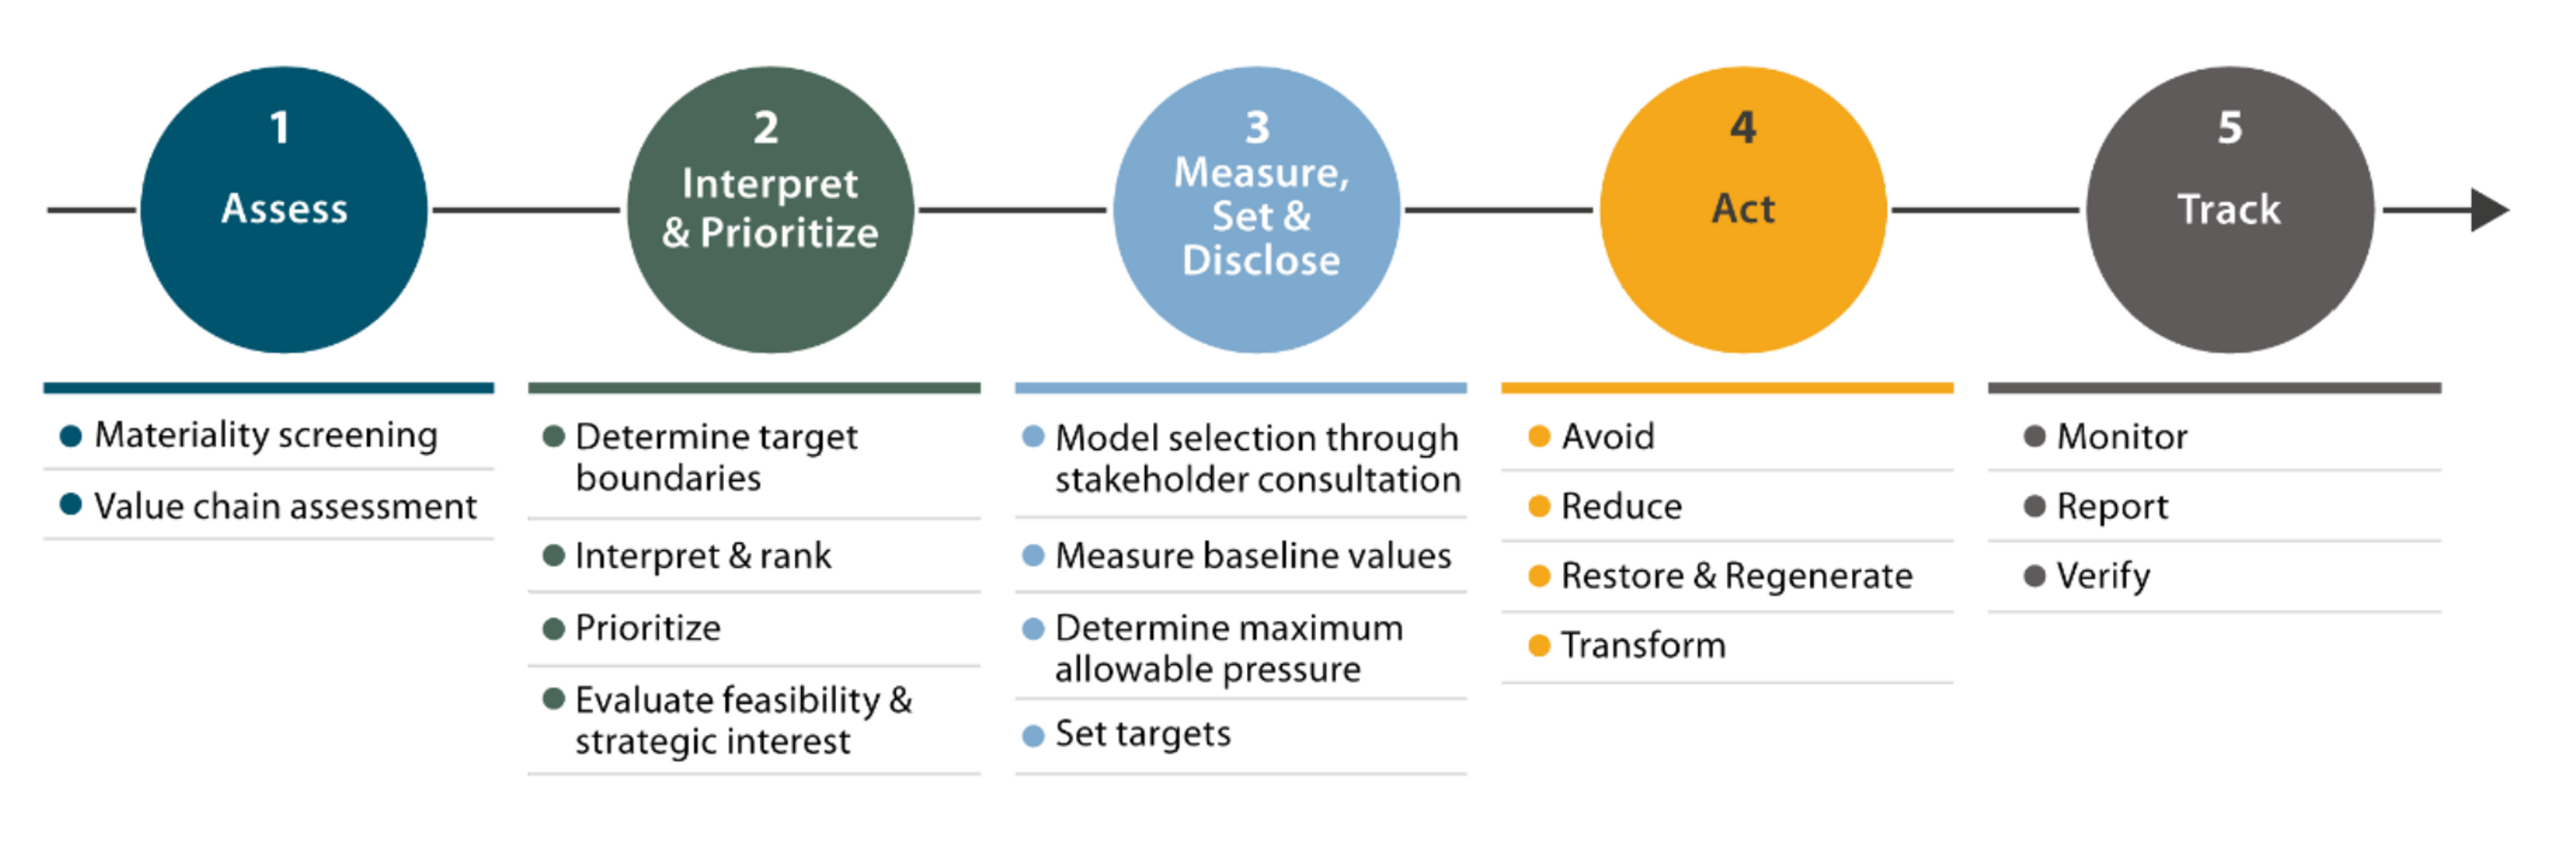 The SBTN framework – assess, interpret and prioritise, measure, set and disclose, act, and track